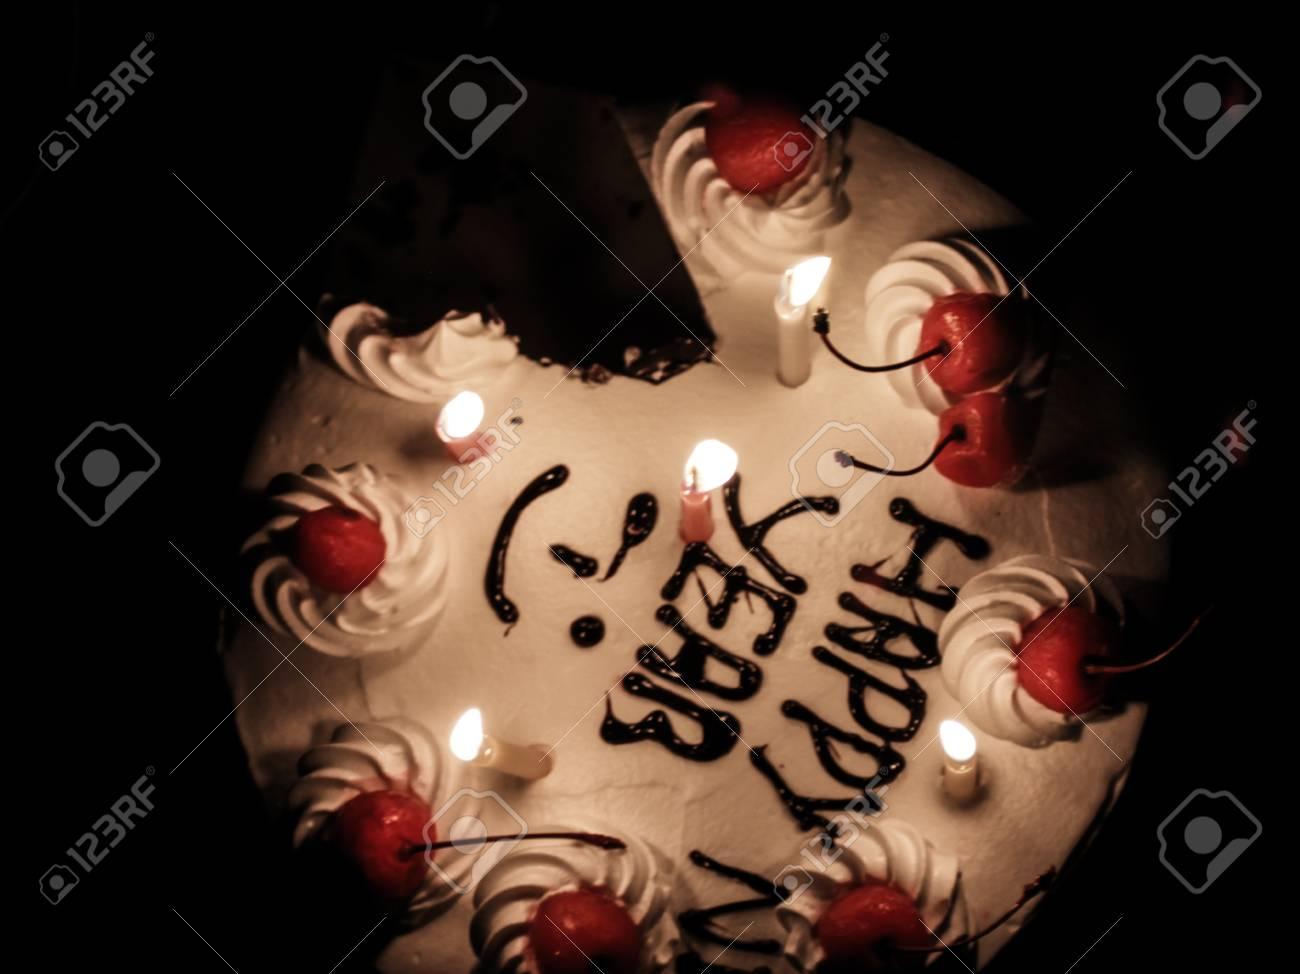 large.1895405300_78131330-happy-new-year-cake-missing-a-piece-with-a-candle010421.jpg